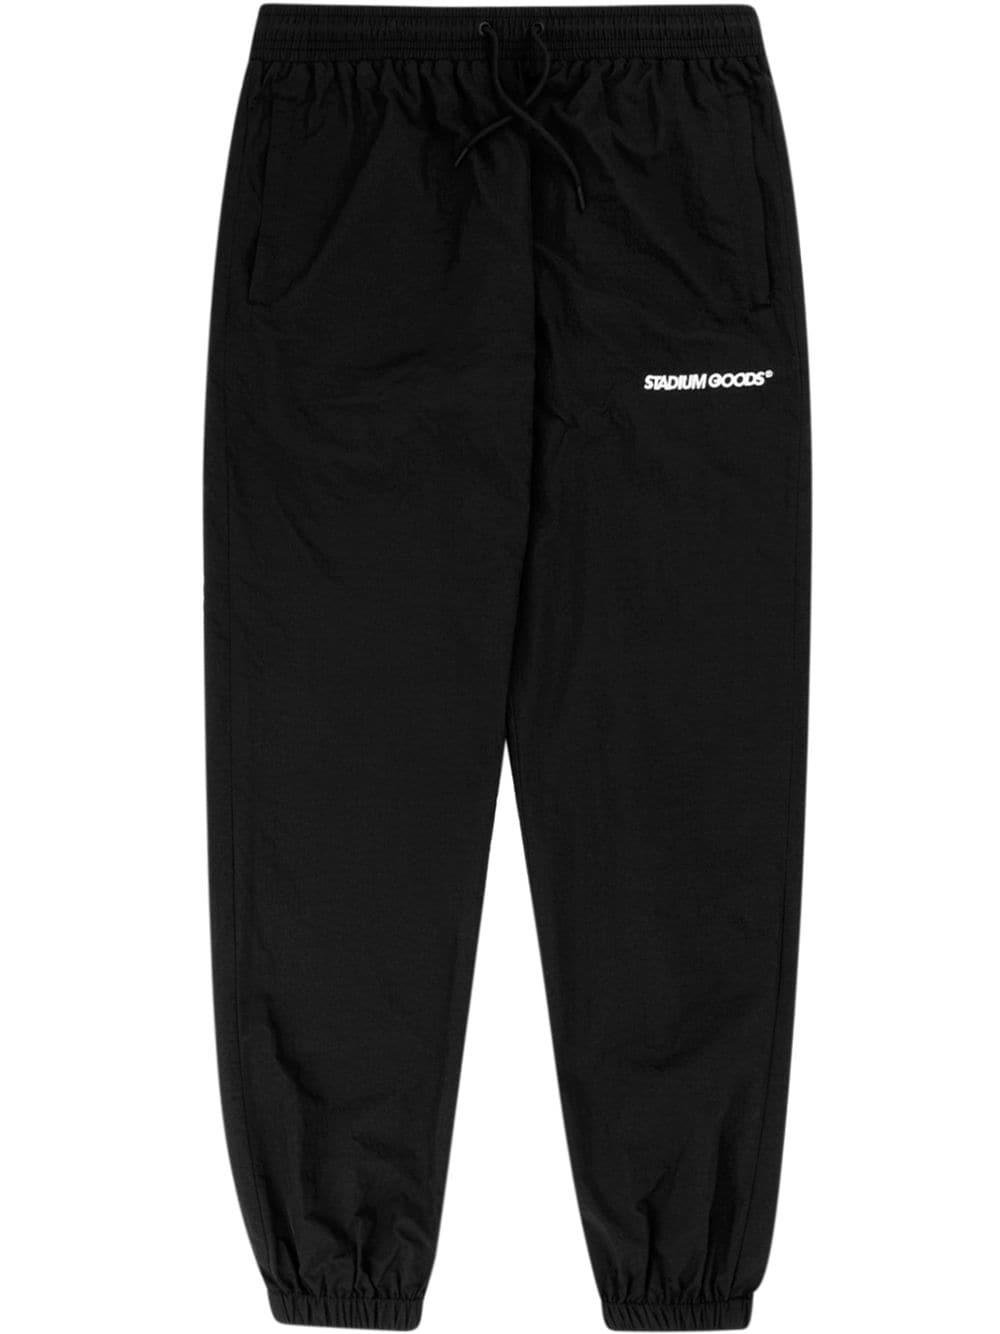 embroidered logo track pants by STADIUM GOODS